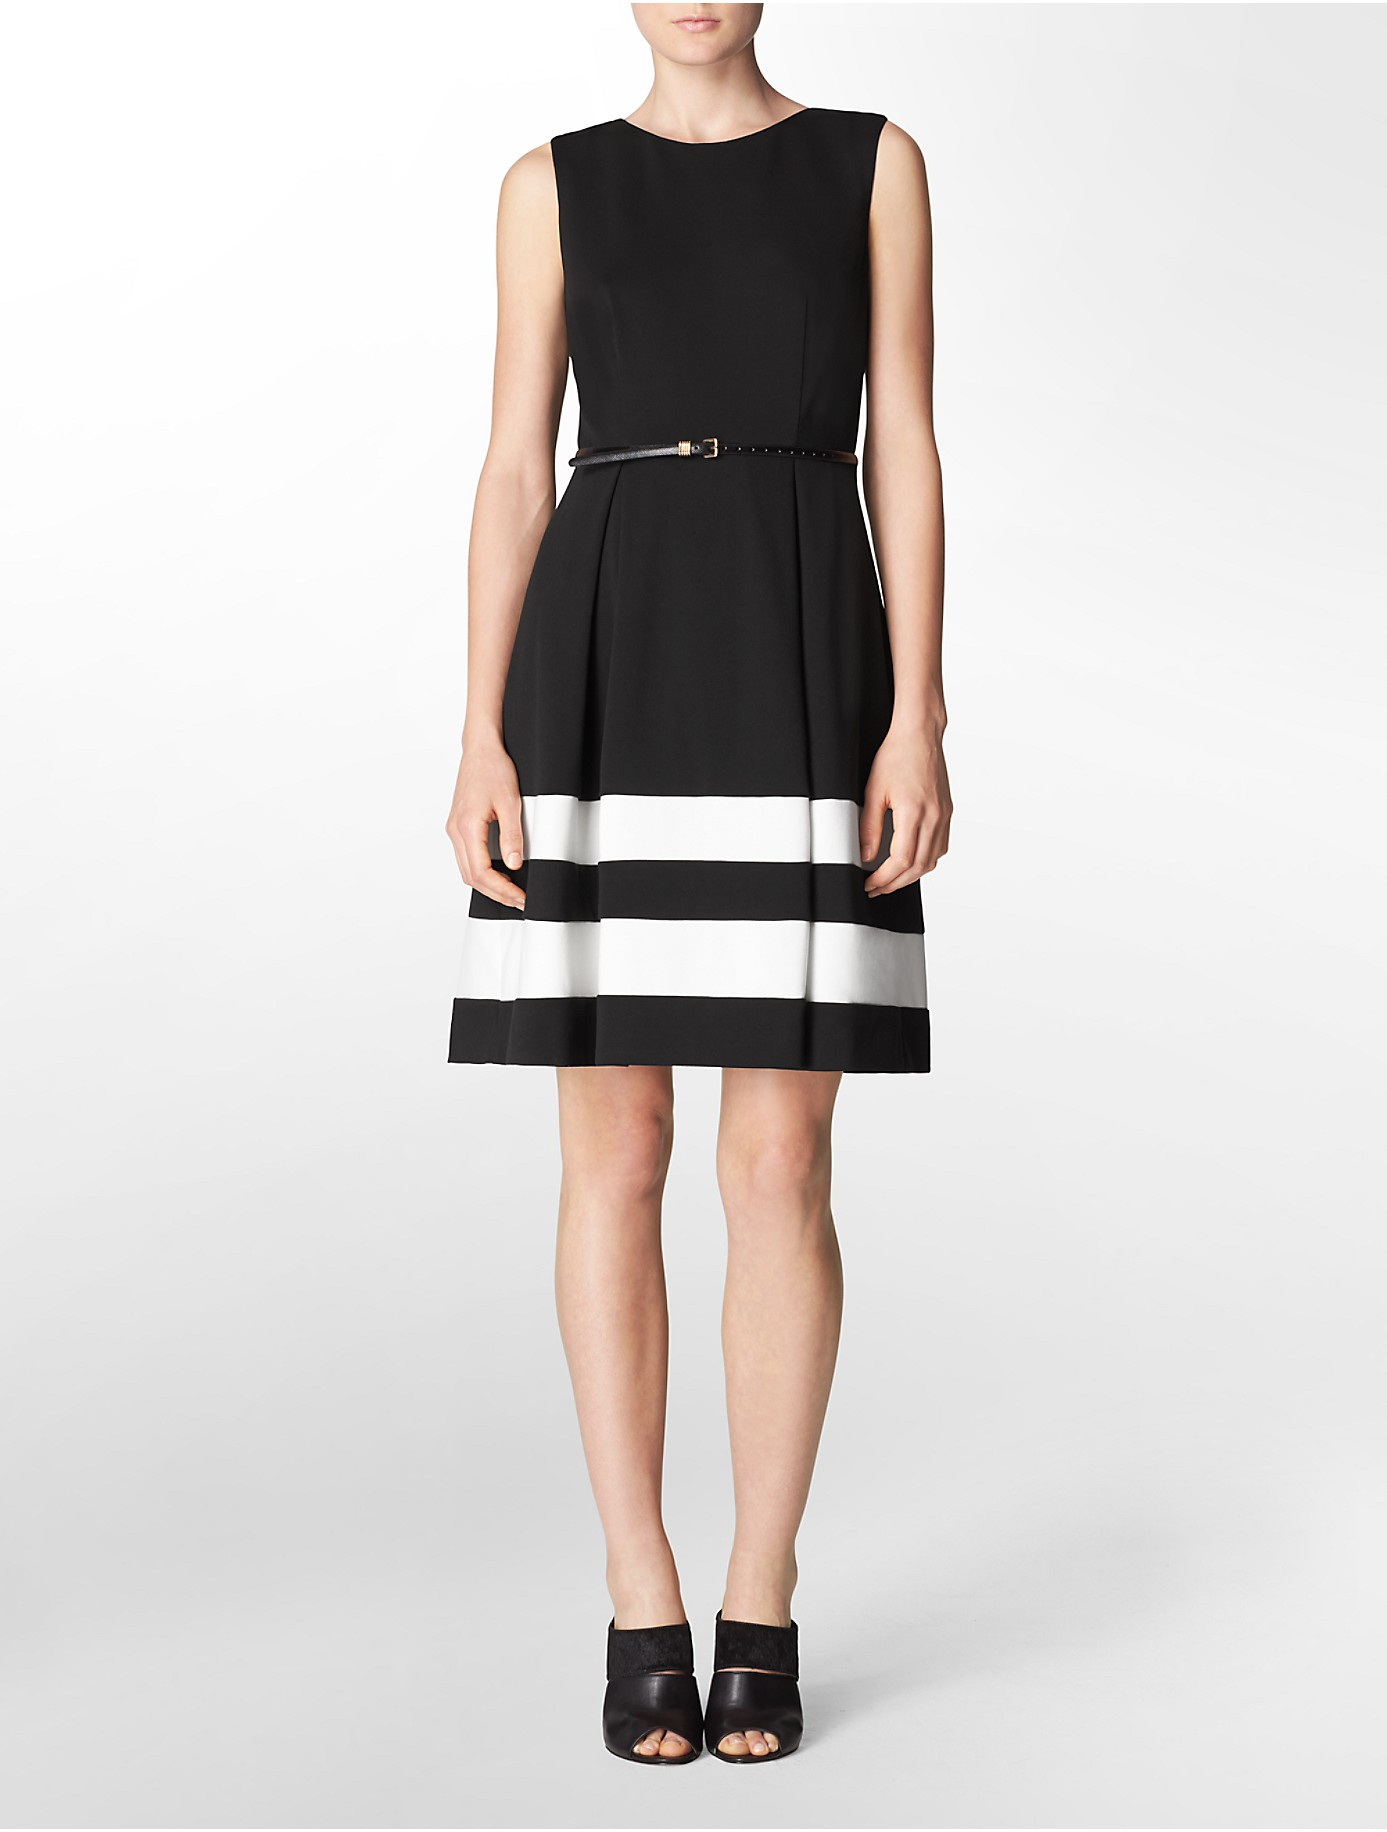 Lyst - Calvin Klein White Label Colorblock Striped Accent Fit + Flare ...